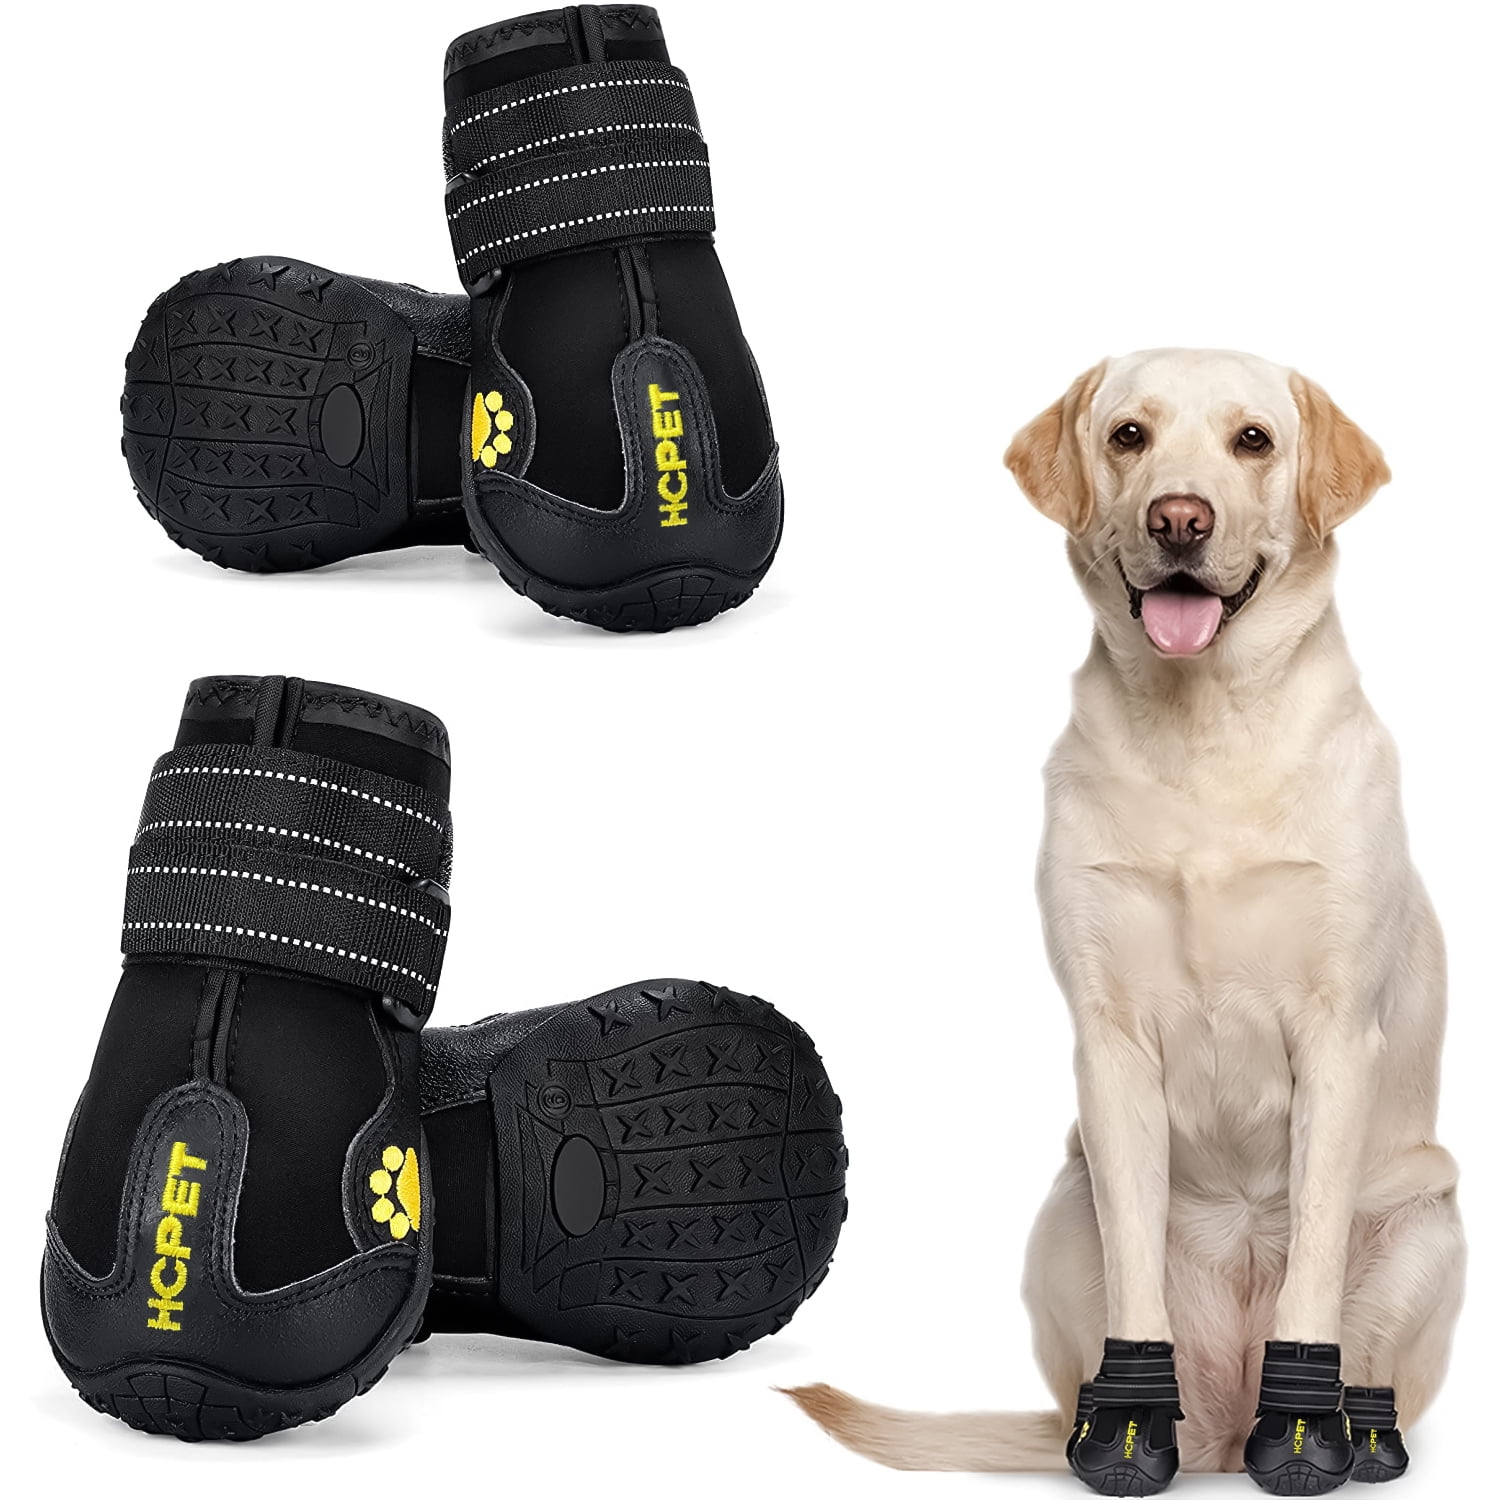 Dog Boots Waterproof Shoes for Dog,Dog Booties with Reflective Rugged Anti-Slip Sole,Outdoor Dog Boots,Dog Boots for Medium to Large Dogs,Rain Boots for Dog 4pcs 